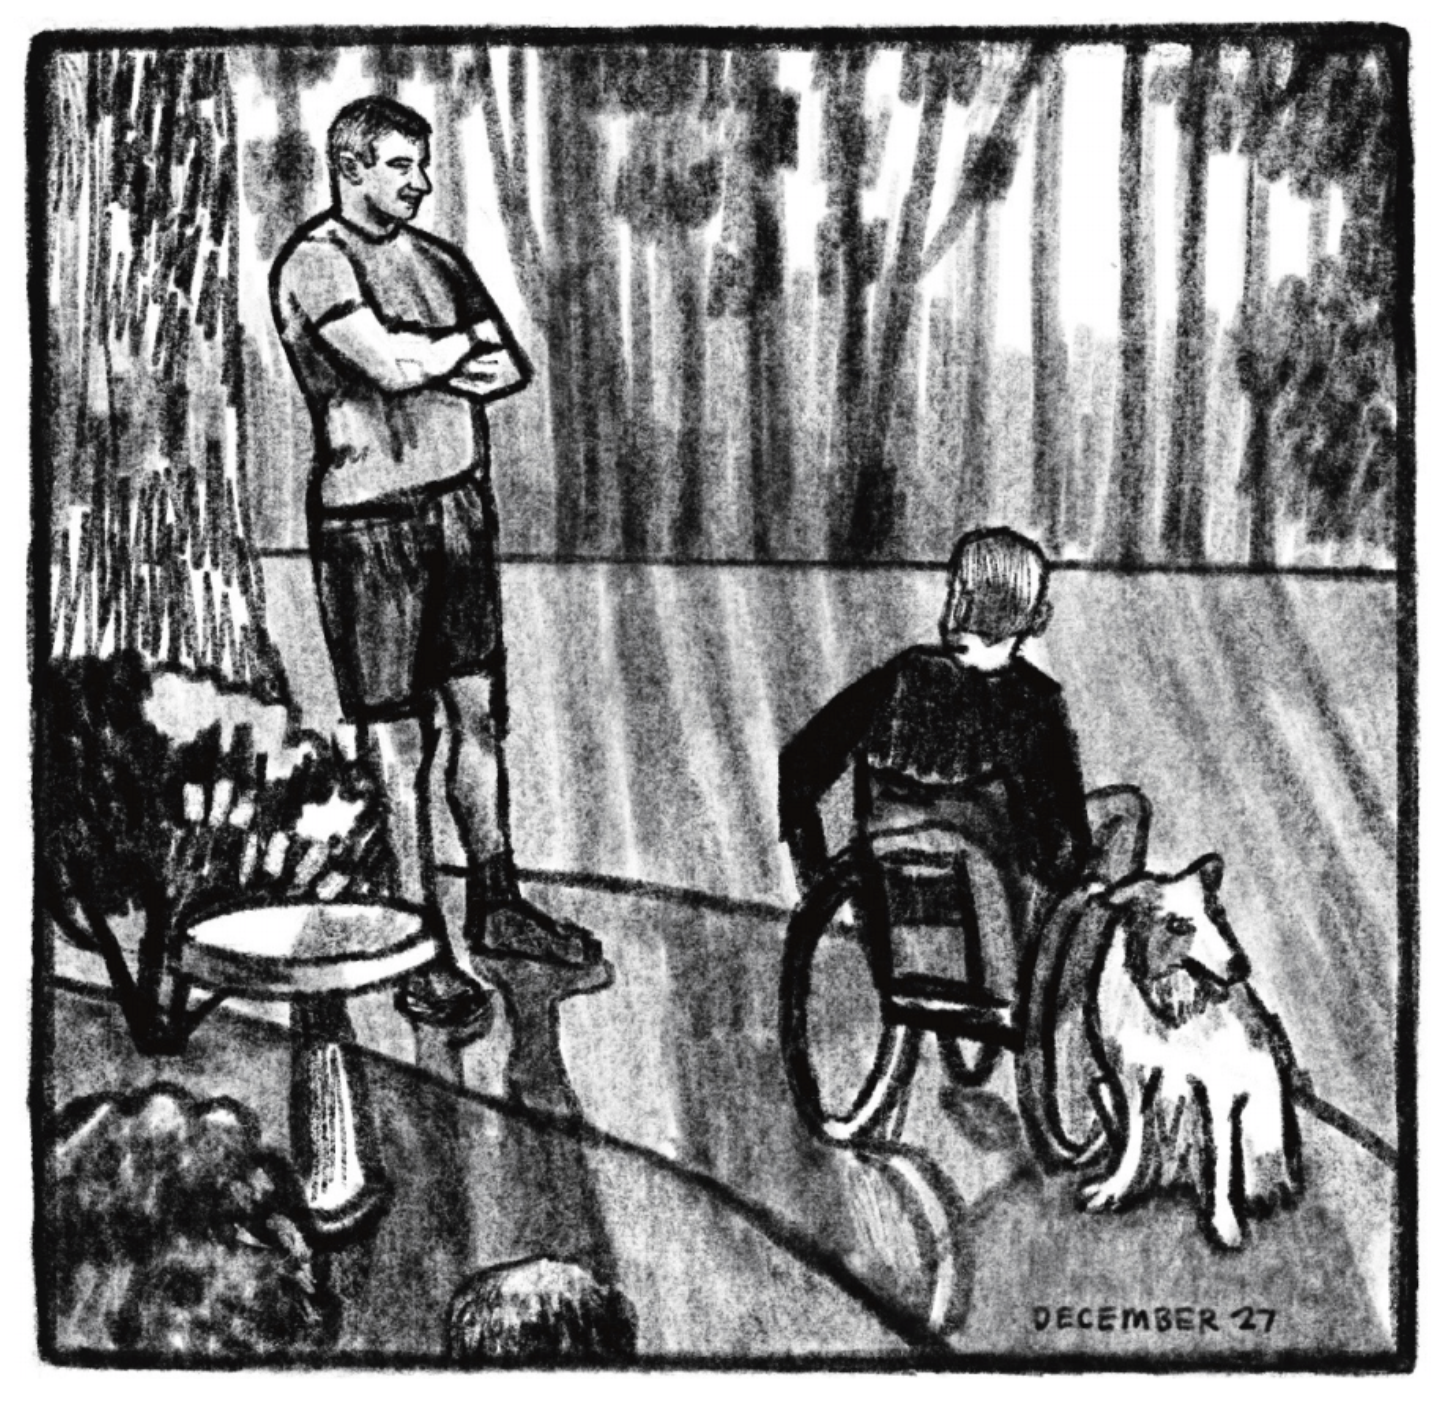 Outside on a curved pavement, Tony stands with his arms crossed and smiling as he looks at a person in a wheelchair; a dog is sitting at their side. There is a bird bath among little bushes next to the path, and trees in the background cast lines of shadows over the grass. â€œDecember 27.â€